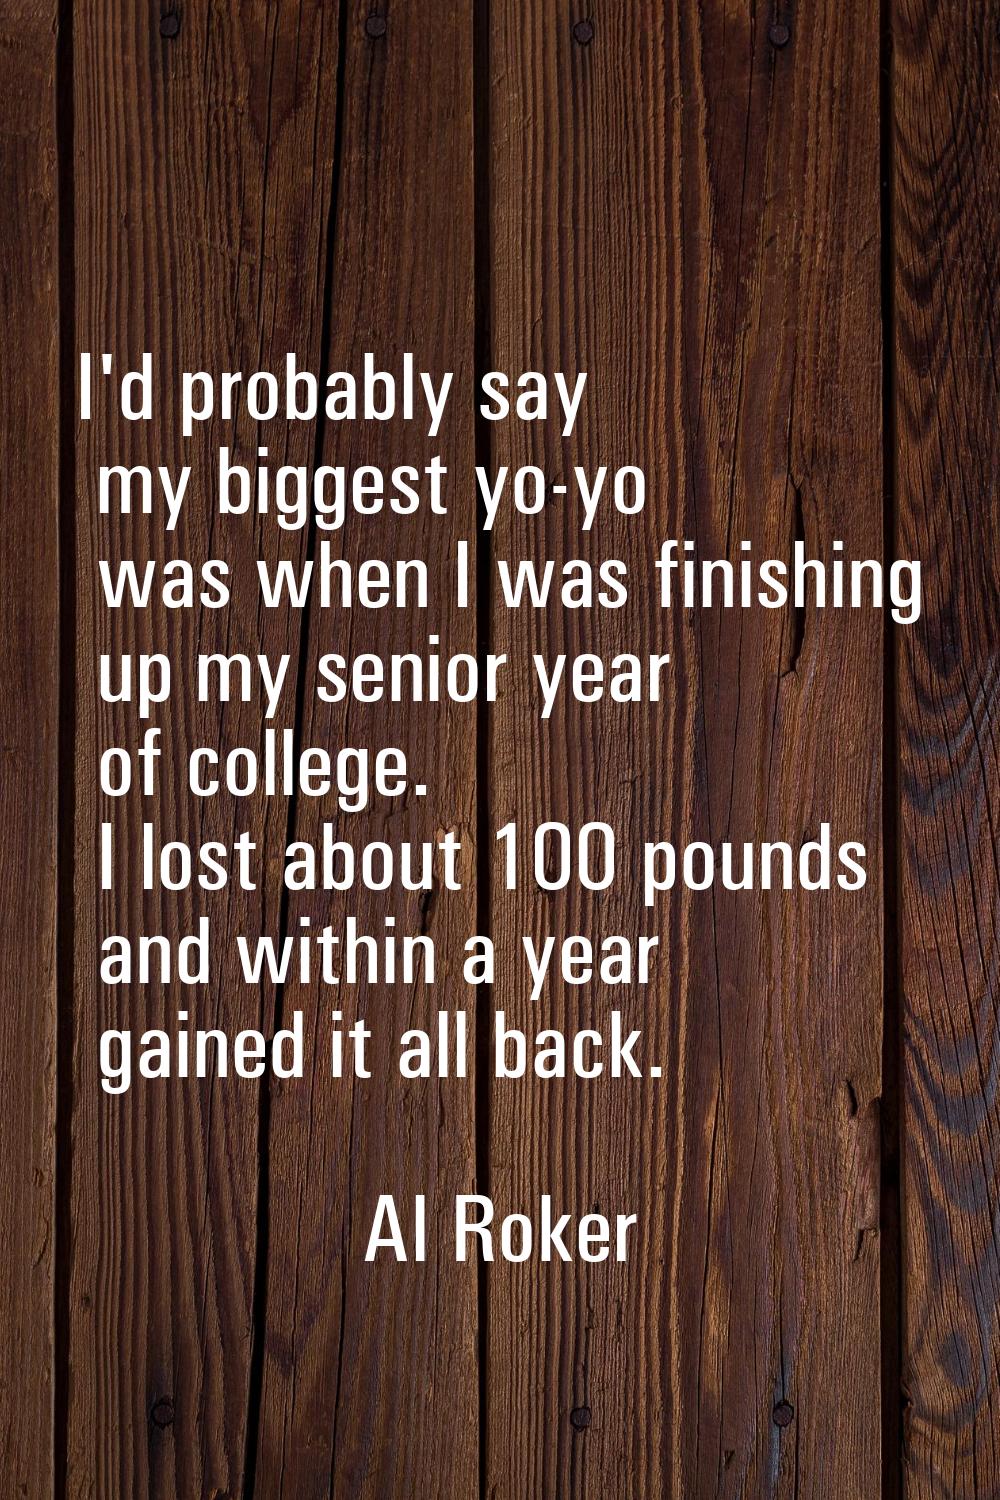 I'd probably say my biggest yo-yo was when I was finishing up my senior year of college. I lost abo